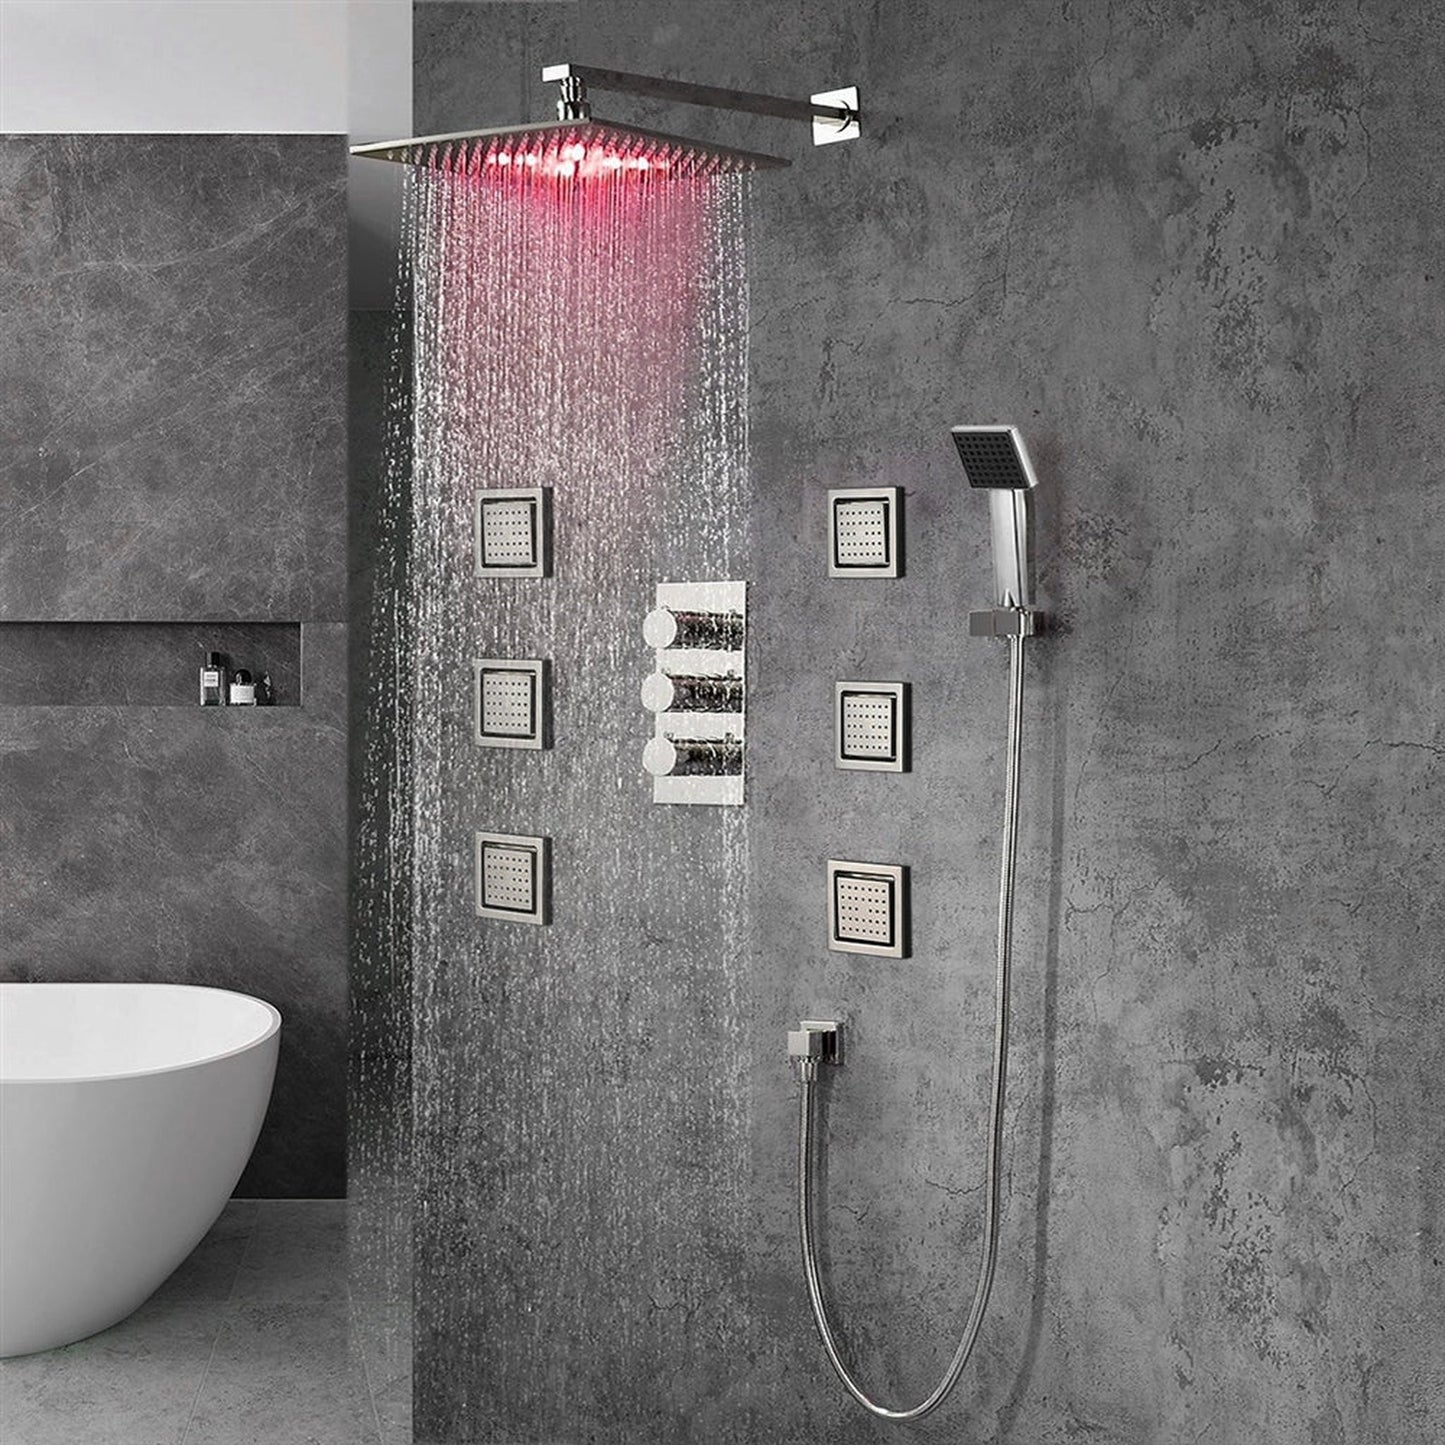 FontanaShowers Milan Creative Luxury 16" Chrome Square Wall-Mounted LED Rainfall Shower System With 6-Jet Stainless Steel Massage Sprays and Hand Shower